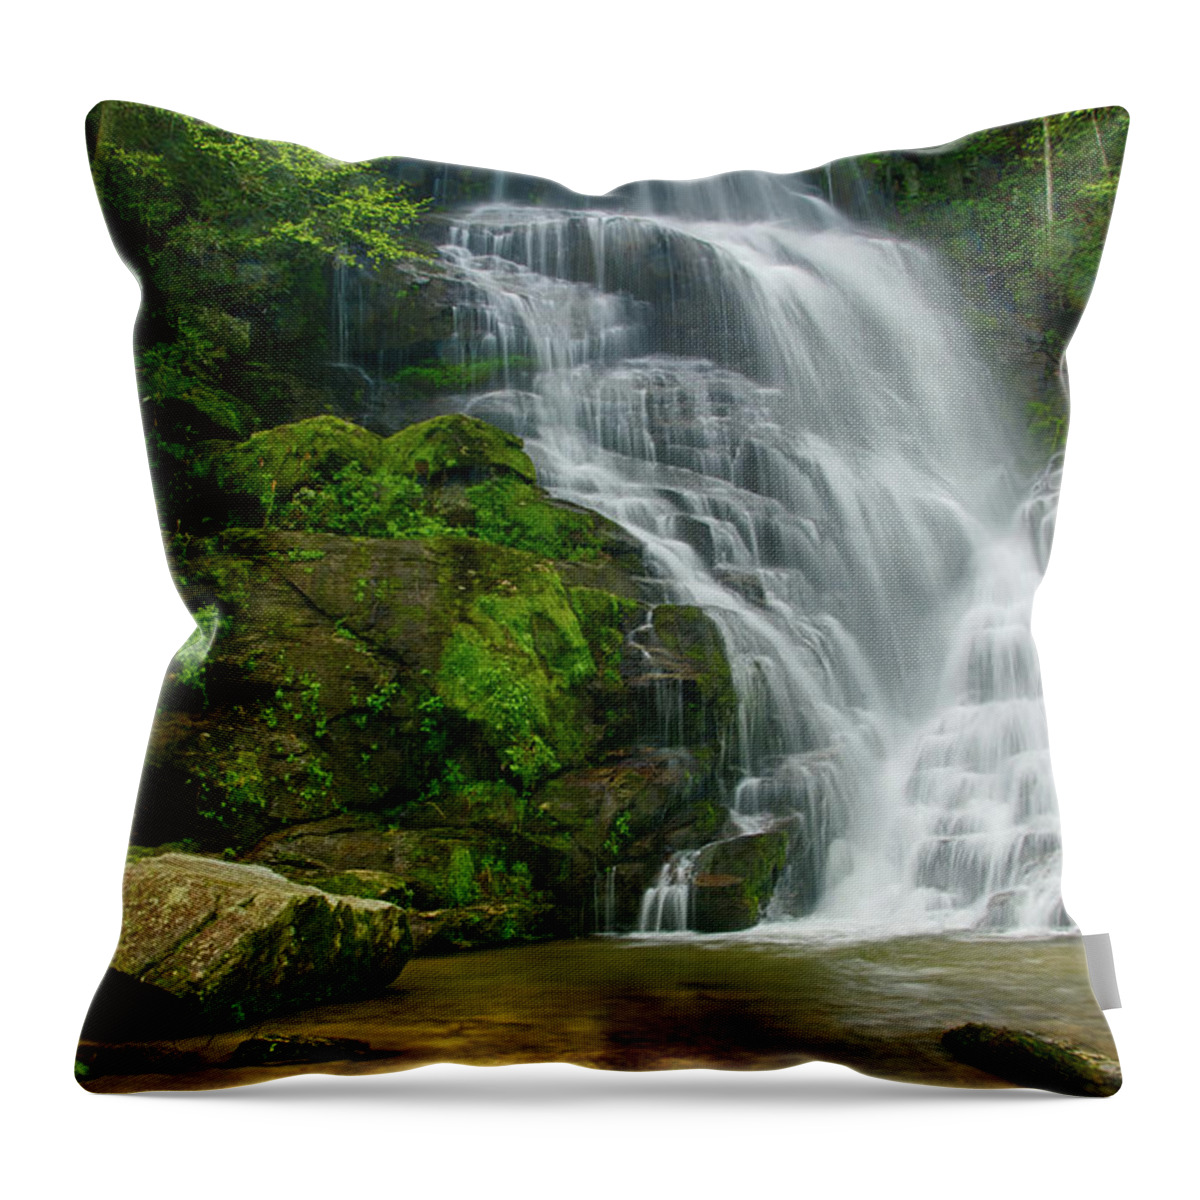 Waterfall Throw Pillow featuring the photograph Eastatoe Falls by Melissa Southern